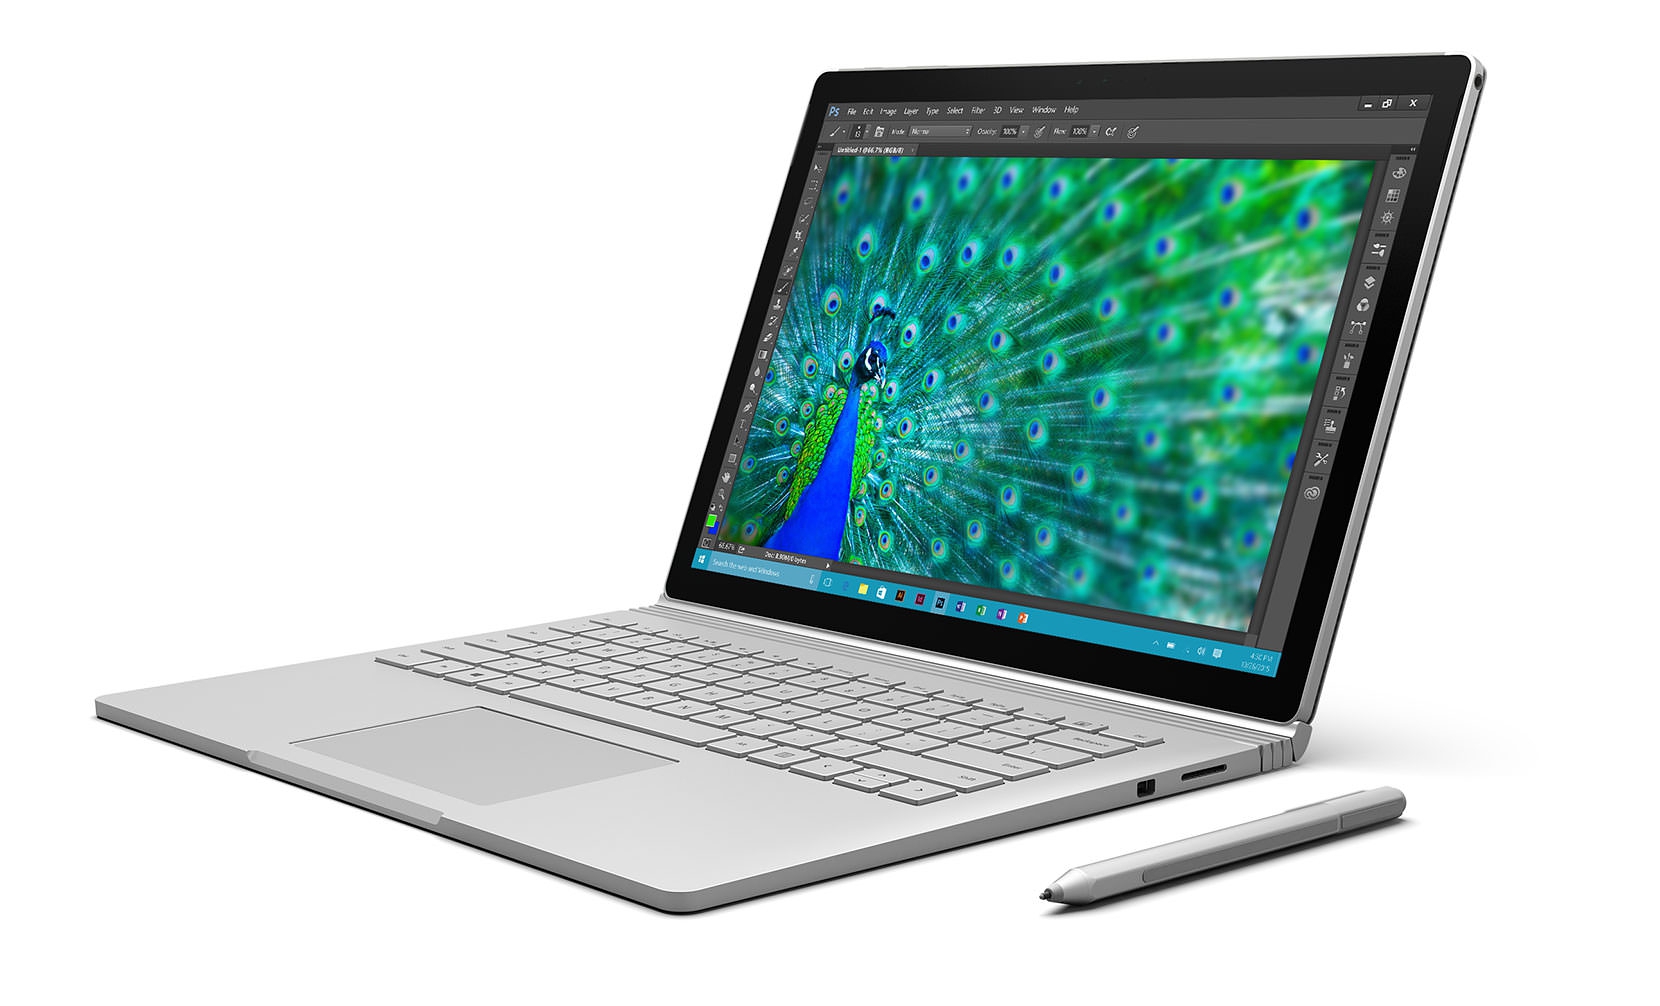 Compact, powerful and a joy to use - the Surface Book could be the Windows laptop we have all dreamed of...